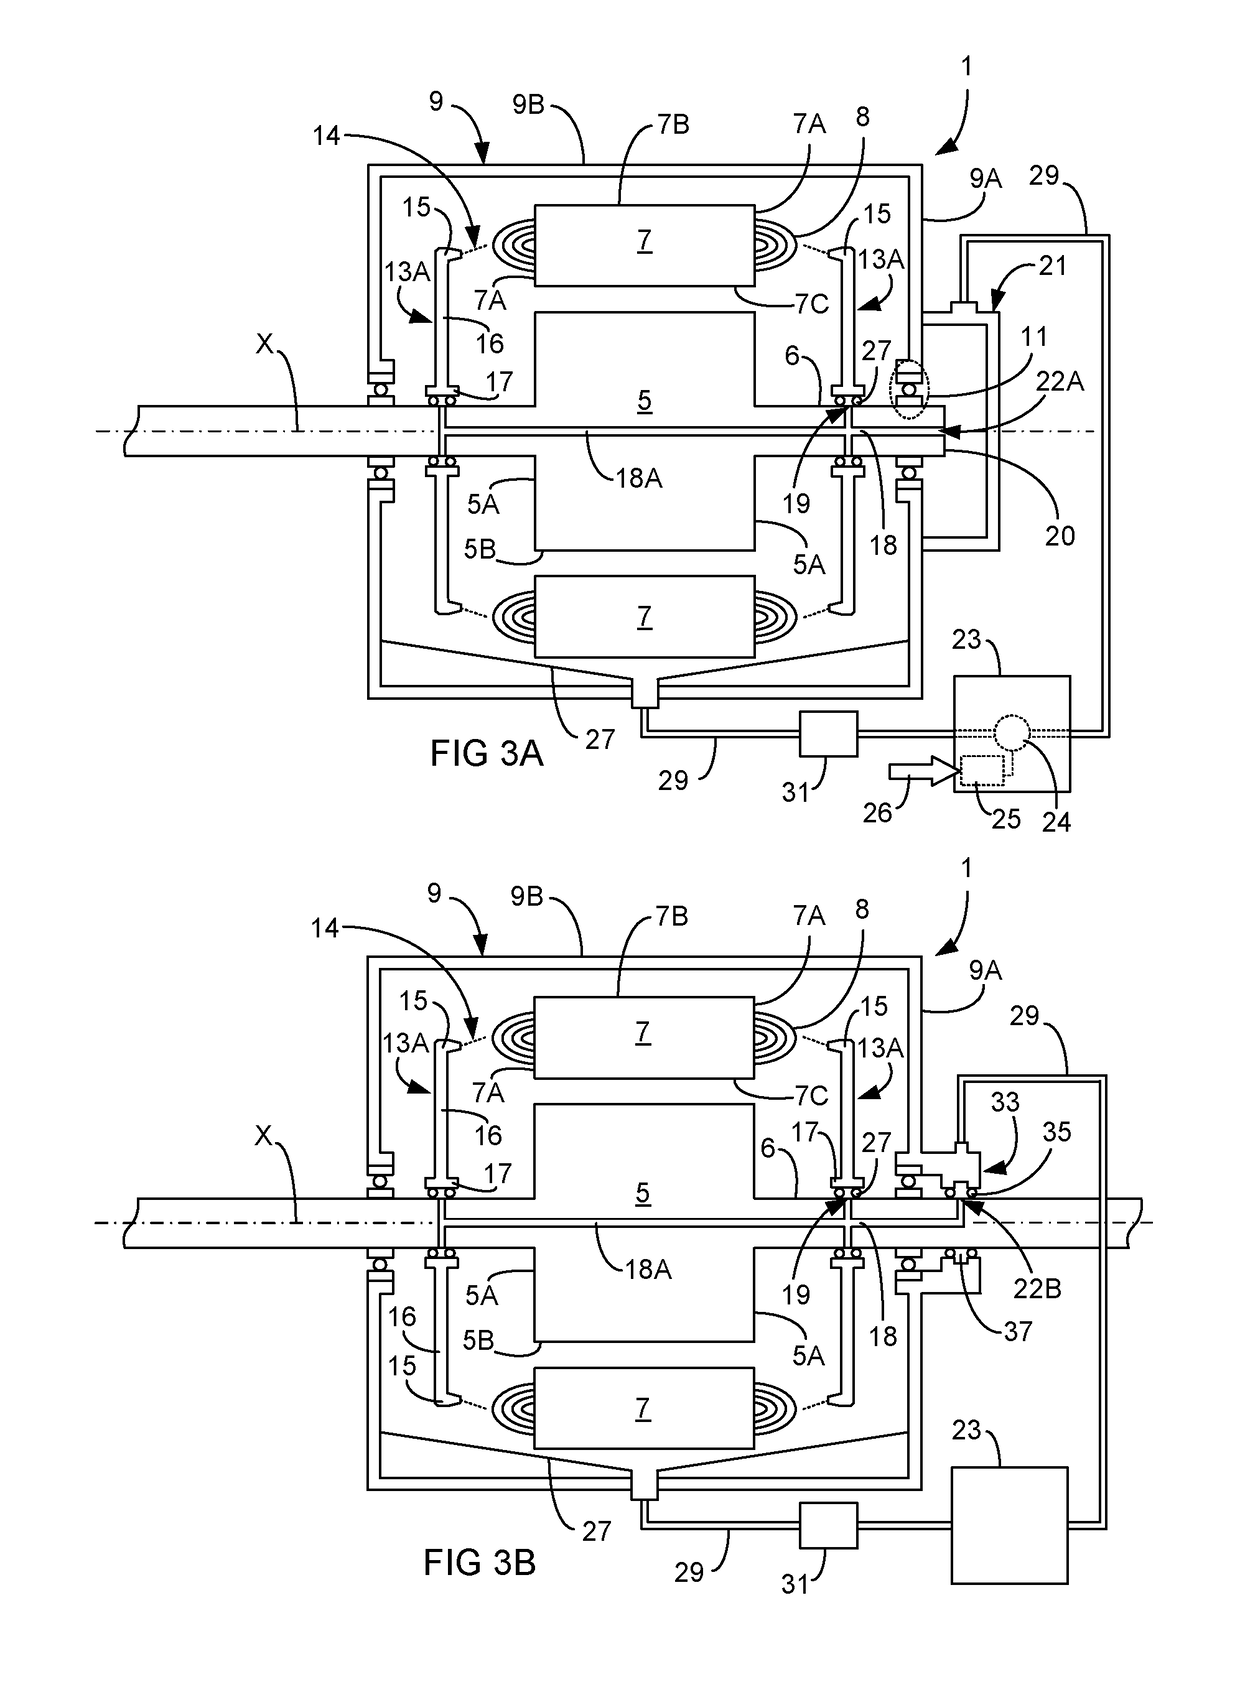 Method and device for liquid cooling of electric motor